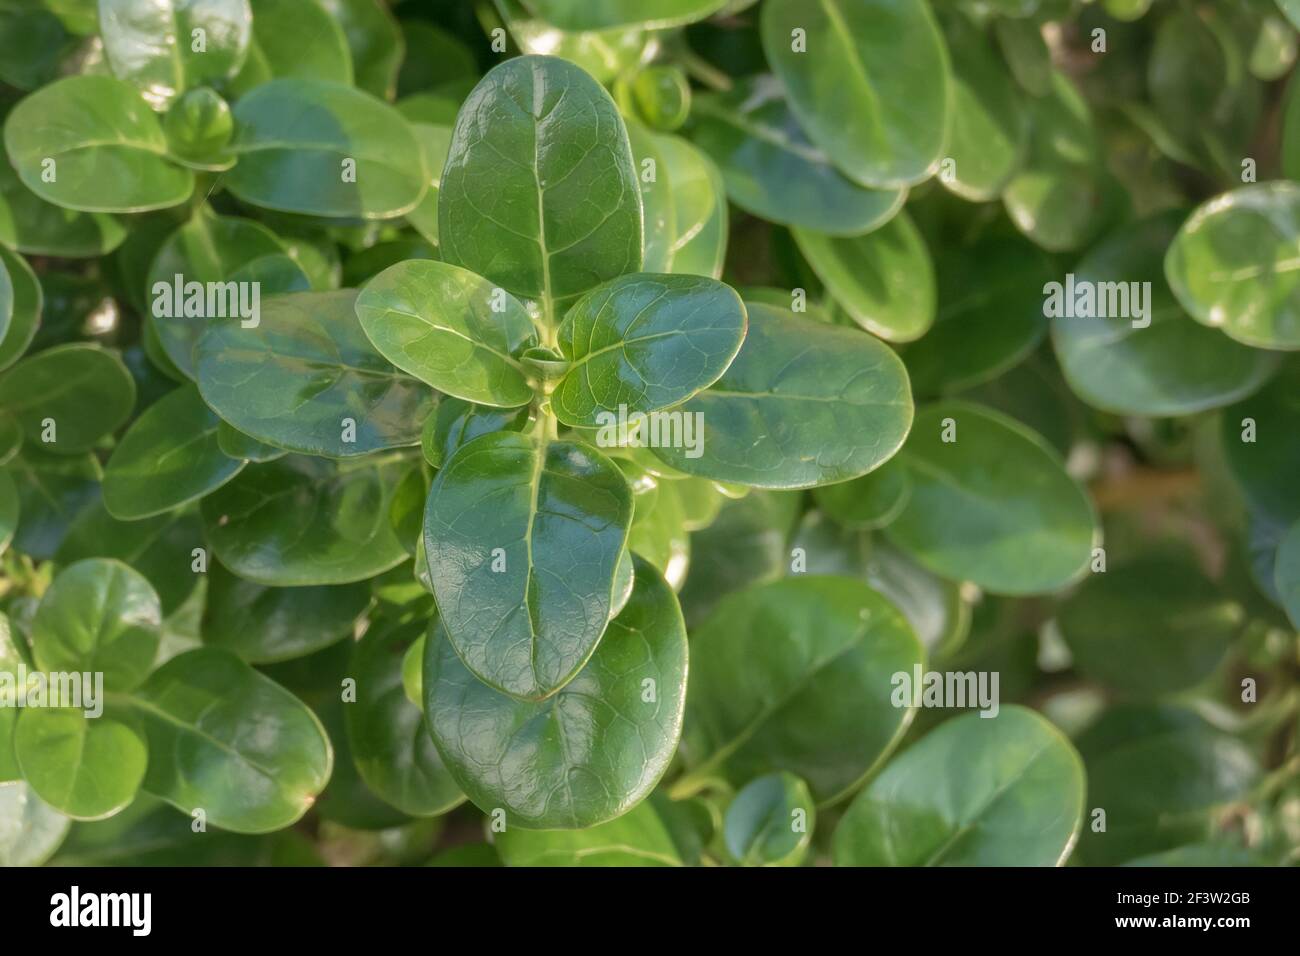 New Zealand laurel leaves close up view from above Stock Photo